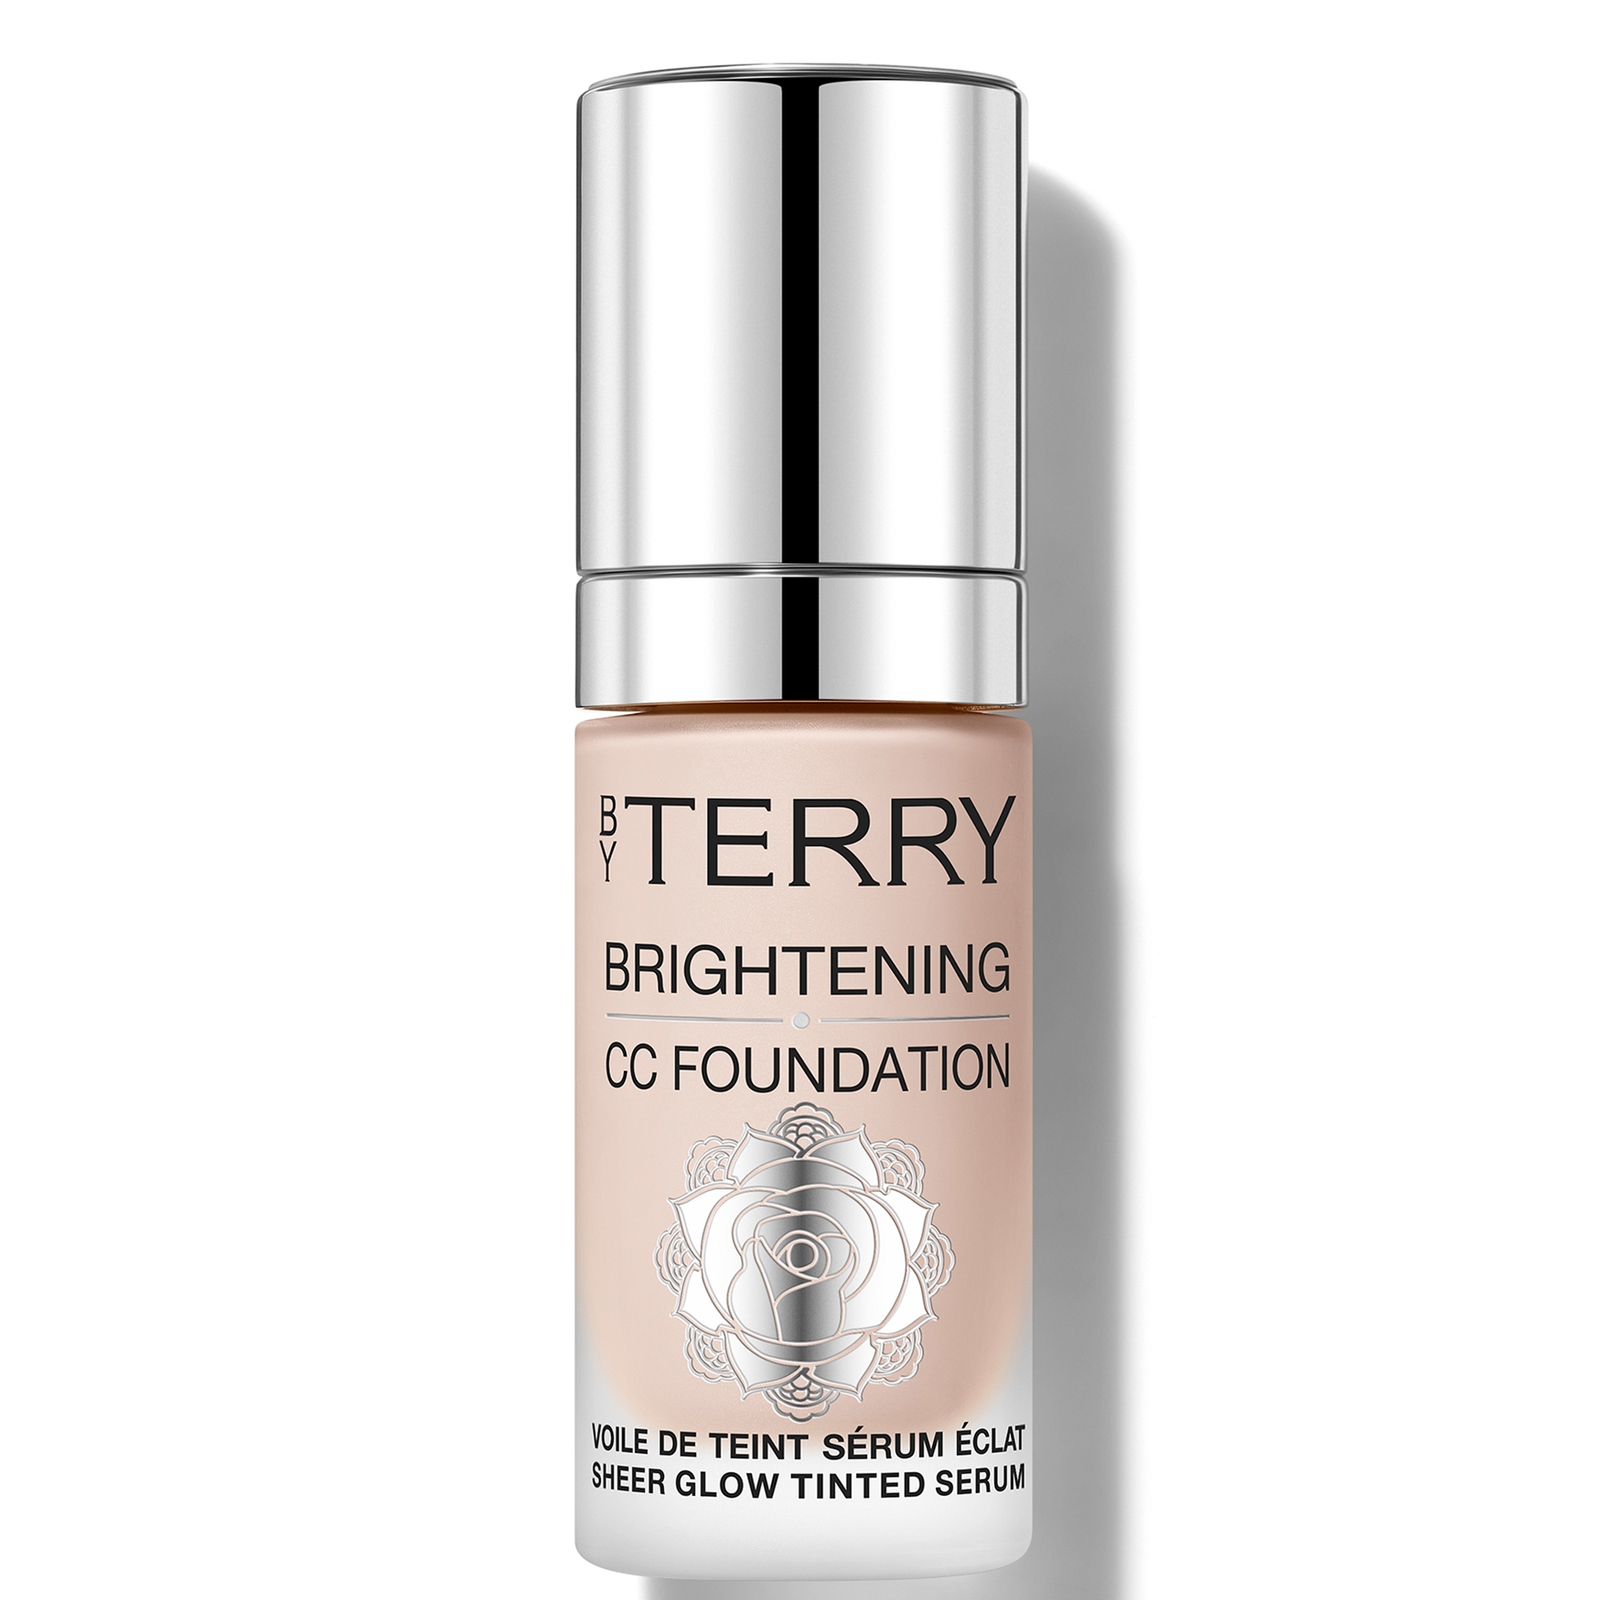 Image of By Terry Brightening CC Foundation 30ml (Various Shades) - 1C - FAIR COOL